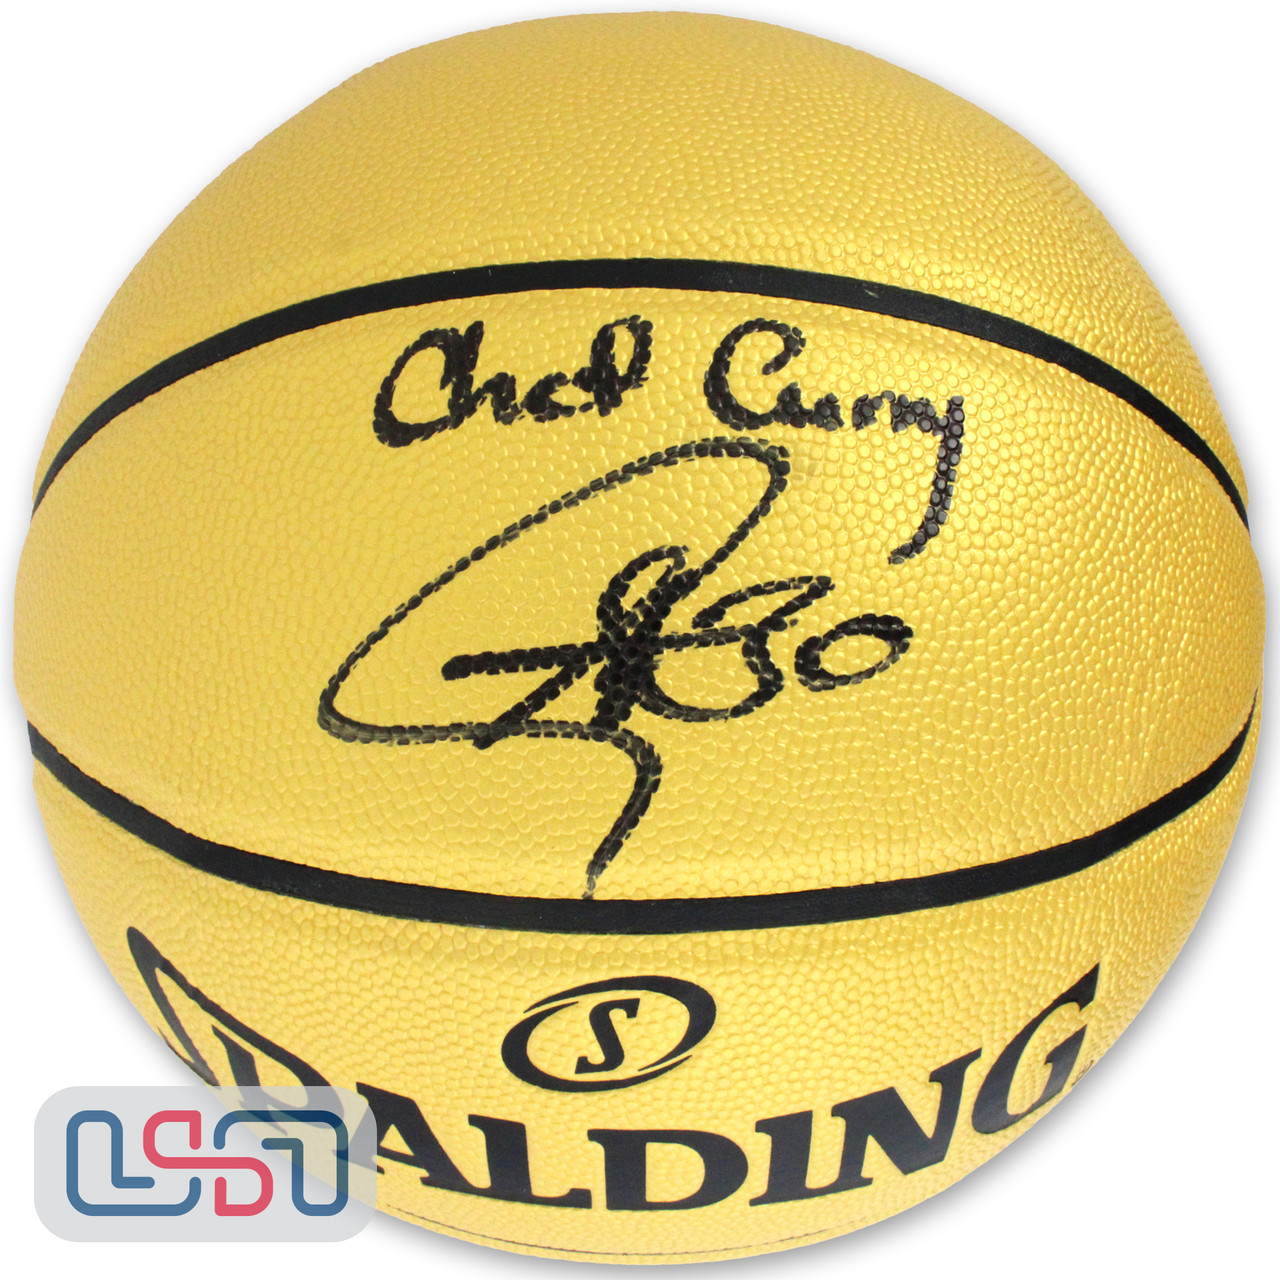 Stephen Curry Signed NBA Game Ball Series Basketball Inscribed Human  Torch (Fanatics Hologram)